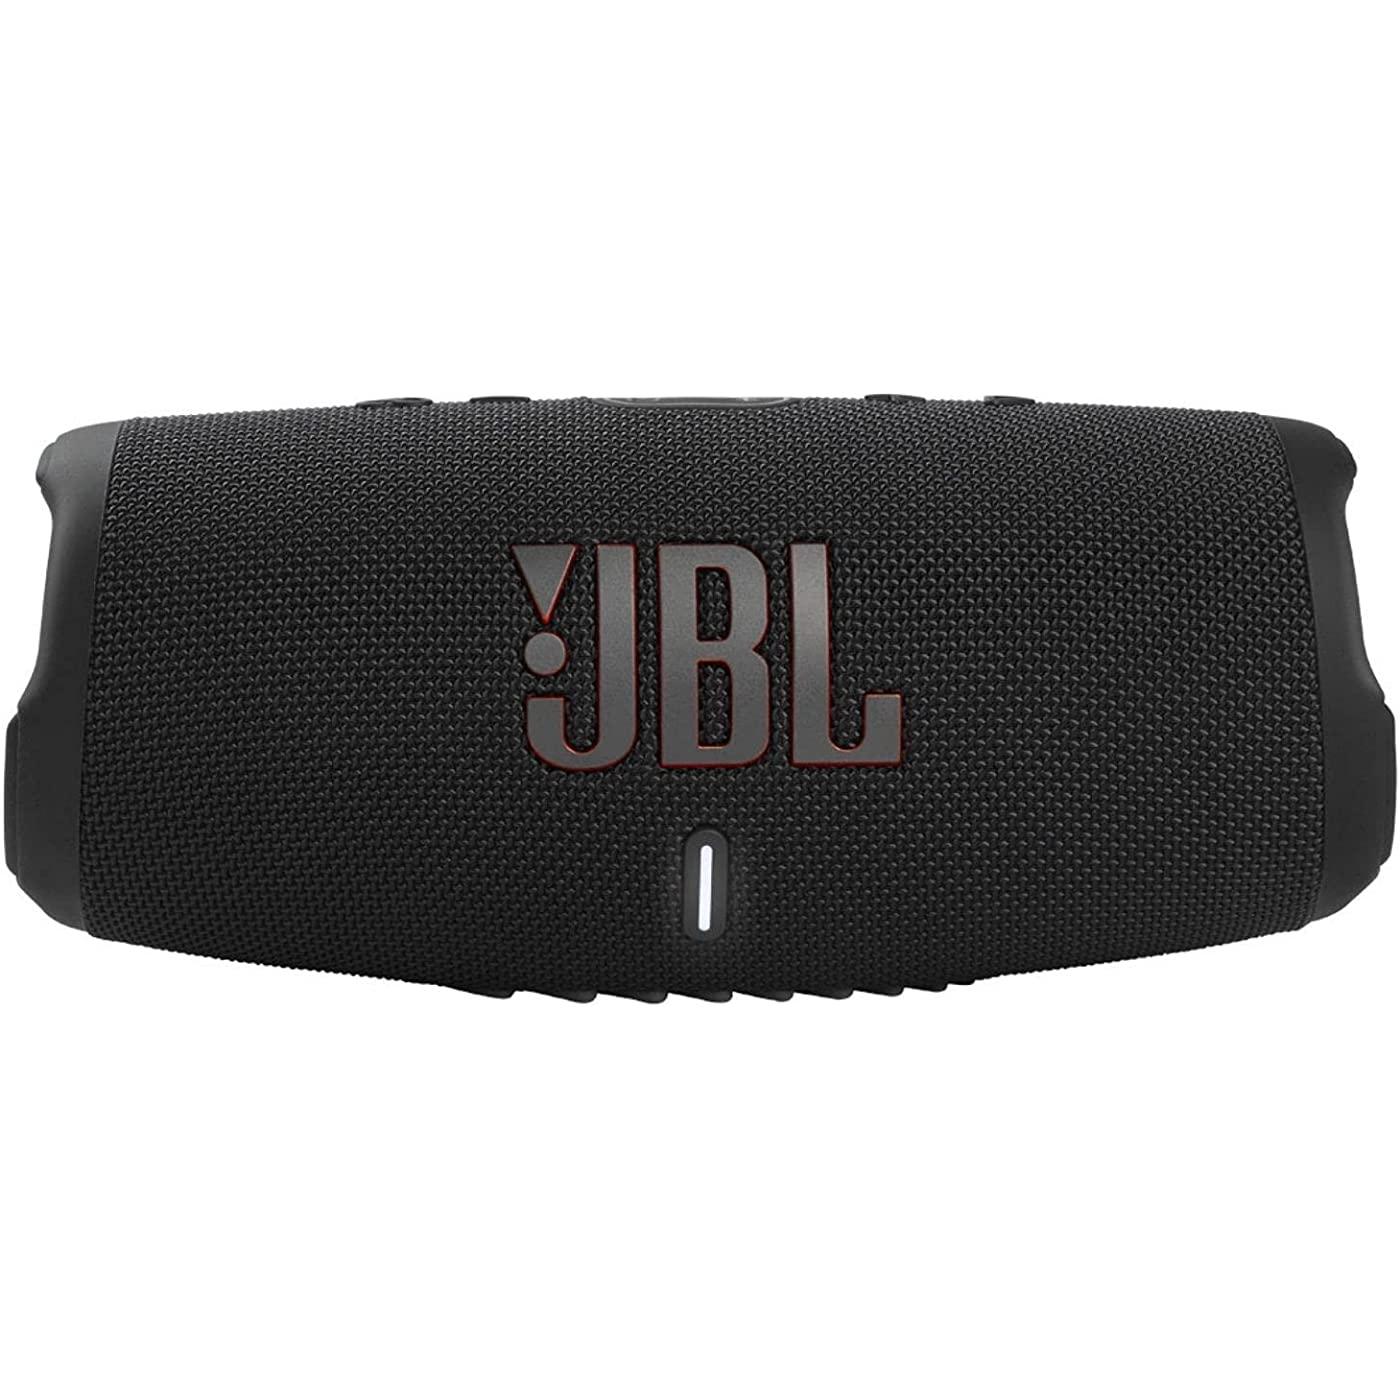 JBL Charge 5 Portable Wireless IP67 Waterproof Bluetooth Speaker for $124.95 Shipped